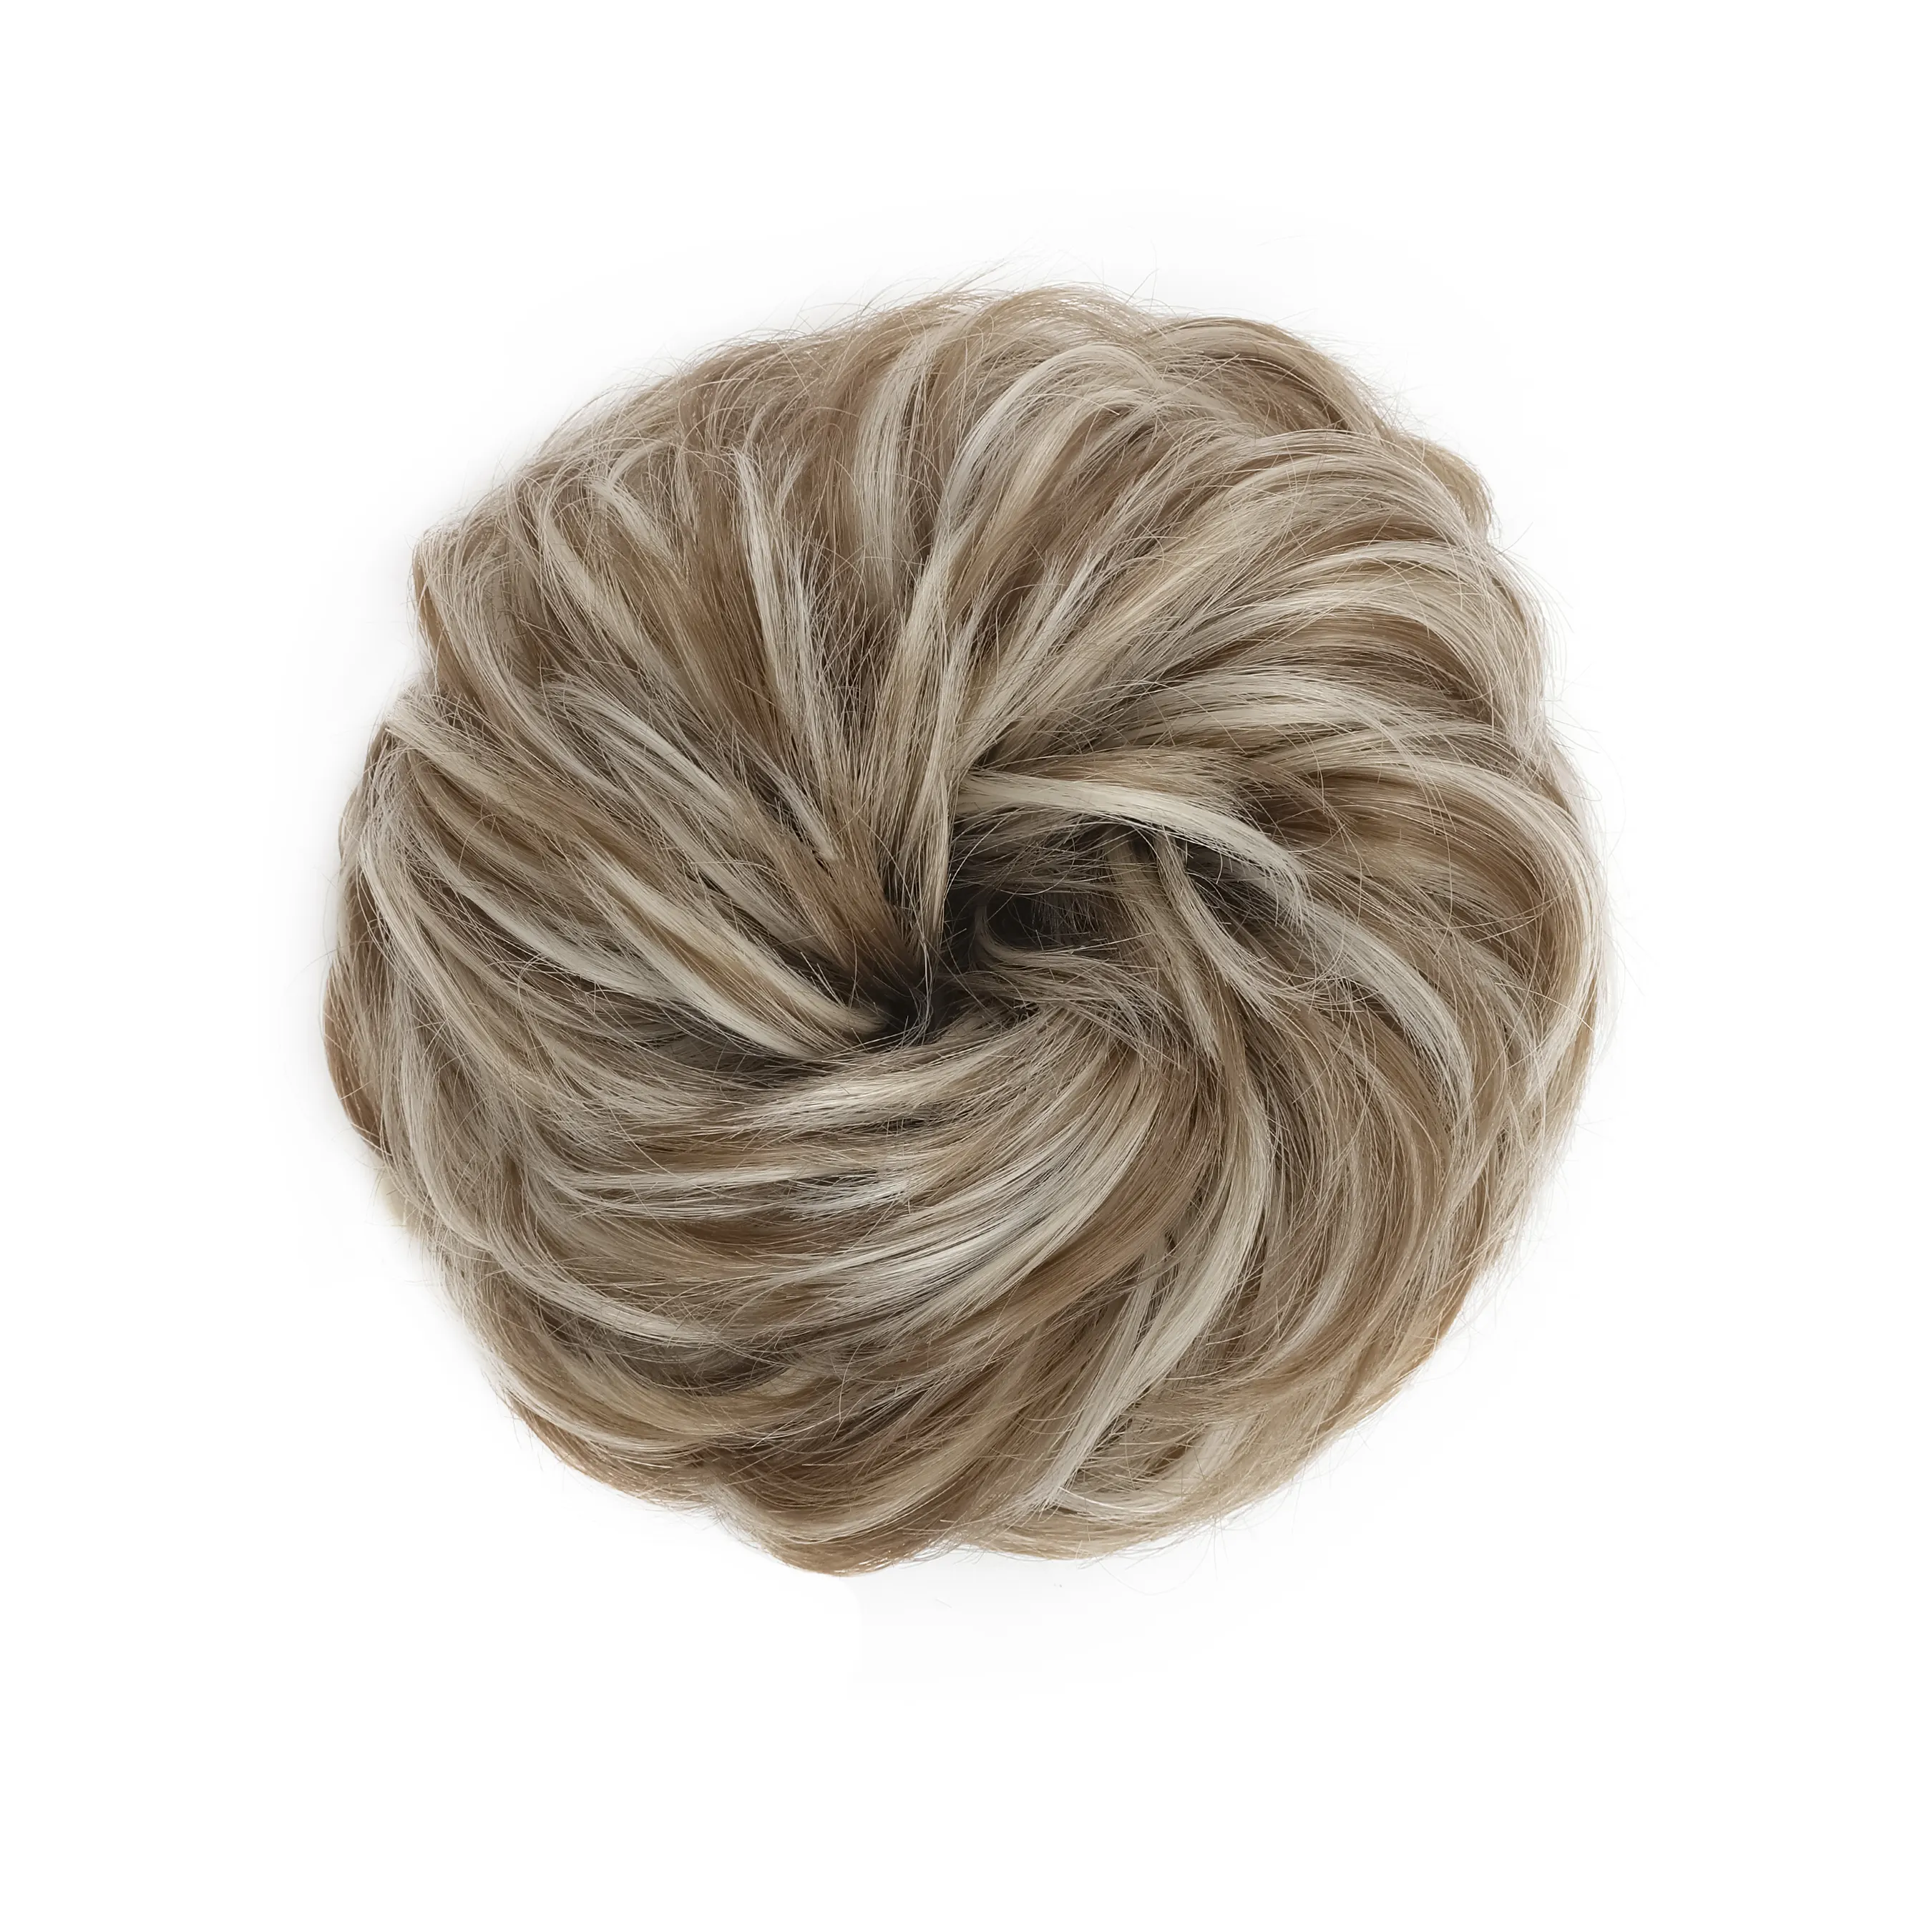 45g thick Tousled hair messy bun elastic band synthetic chignon Donut hair extension ponytail hairpiece